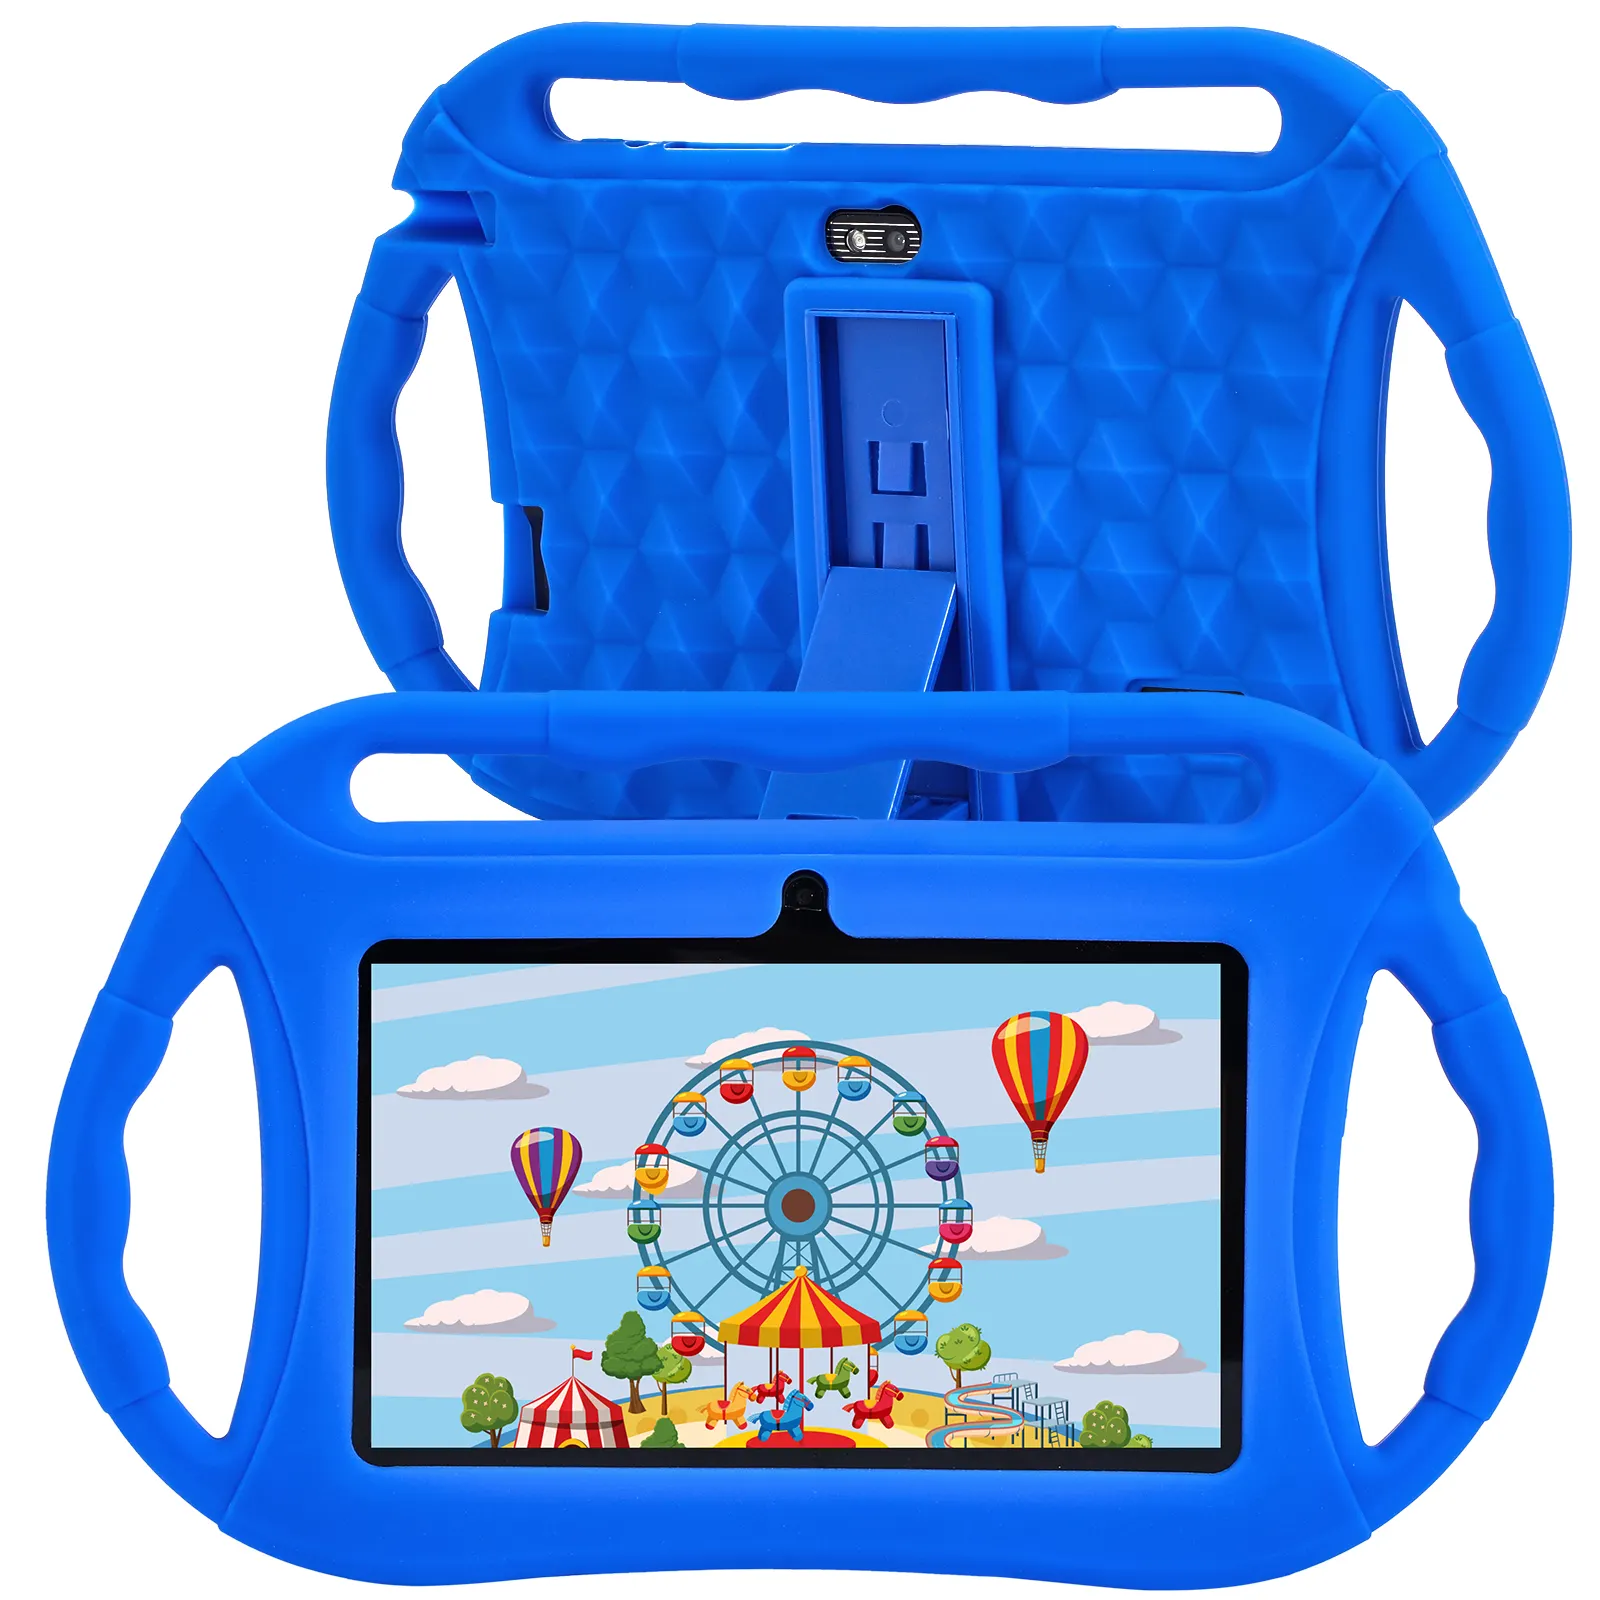 7" Tablets OEM Best Gifts For Kids Gaming and Education 2GB Ram 32GB Rom 7 Inch Android 10.0 Tablet Pc